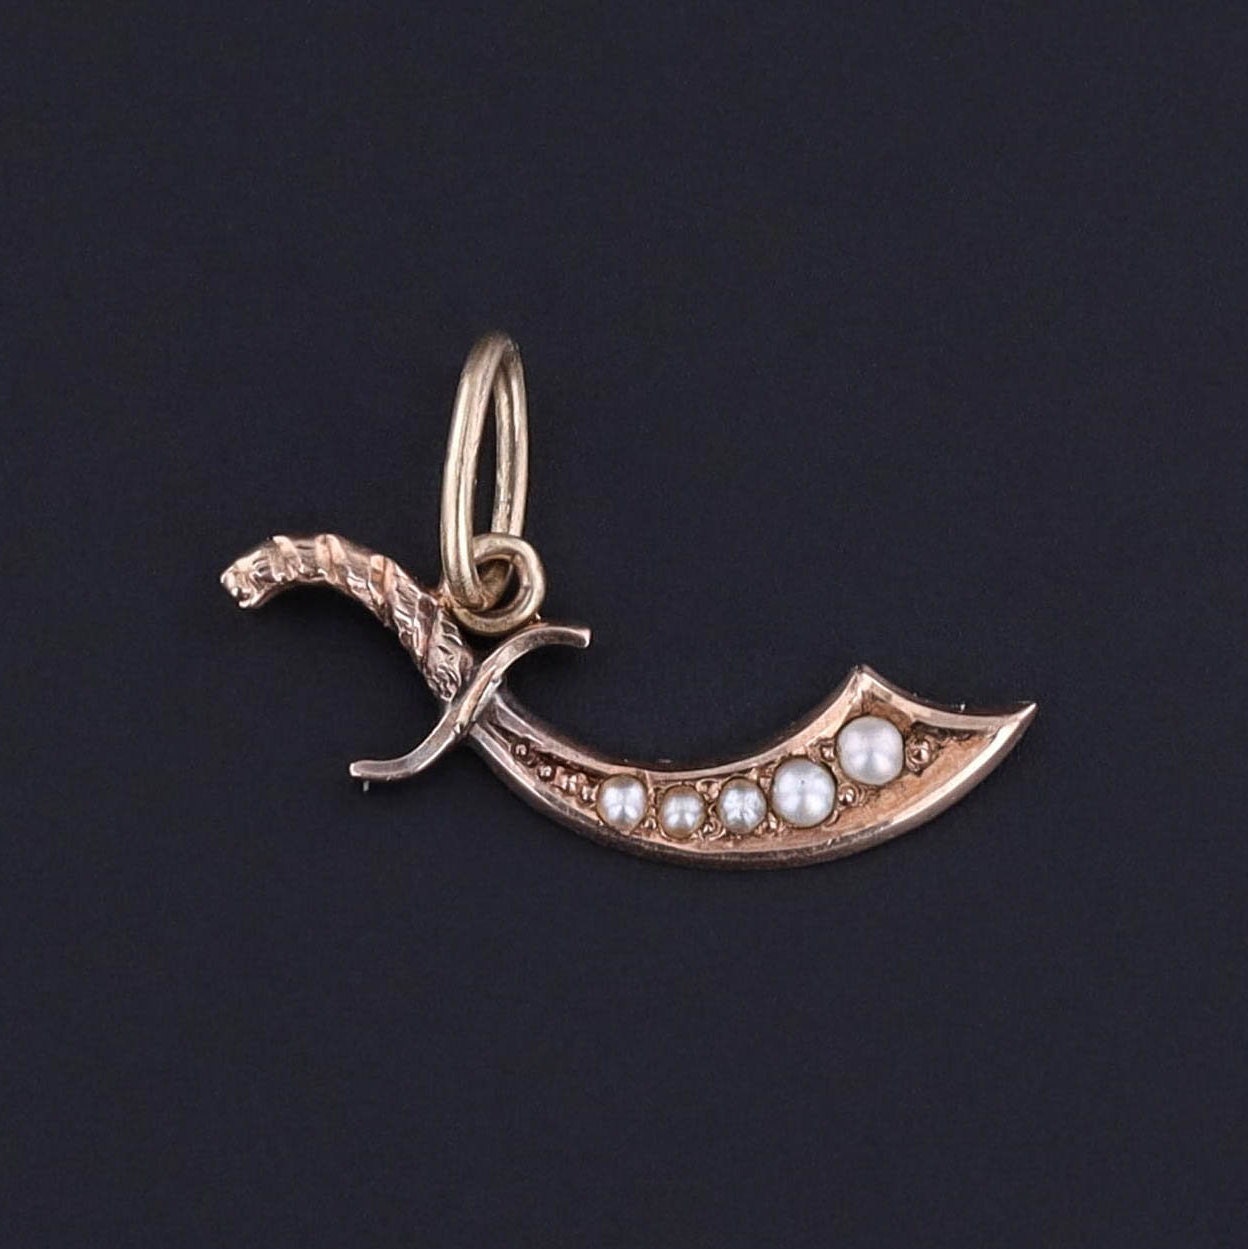 Antique Pearl Dadao Sword Charm of 10k Gold